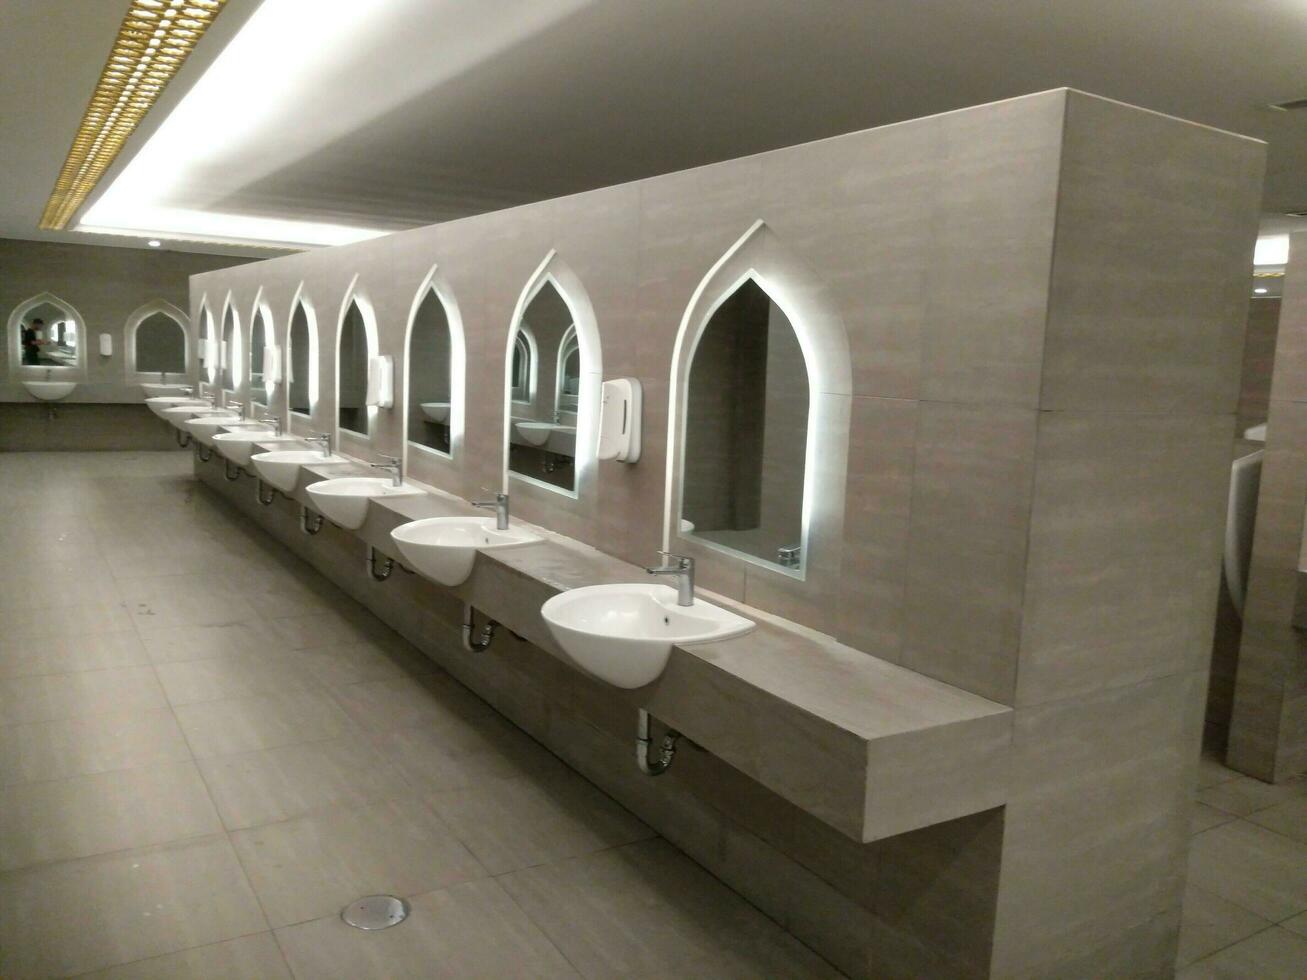 The ablution room in the mosque. The Wudu washroom photo